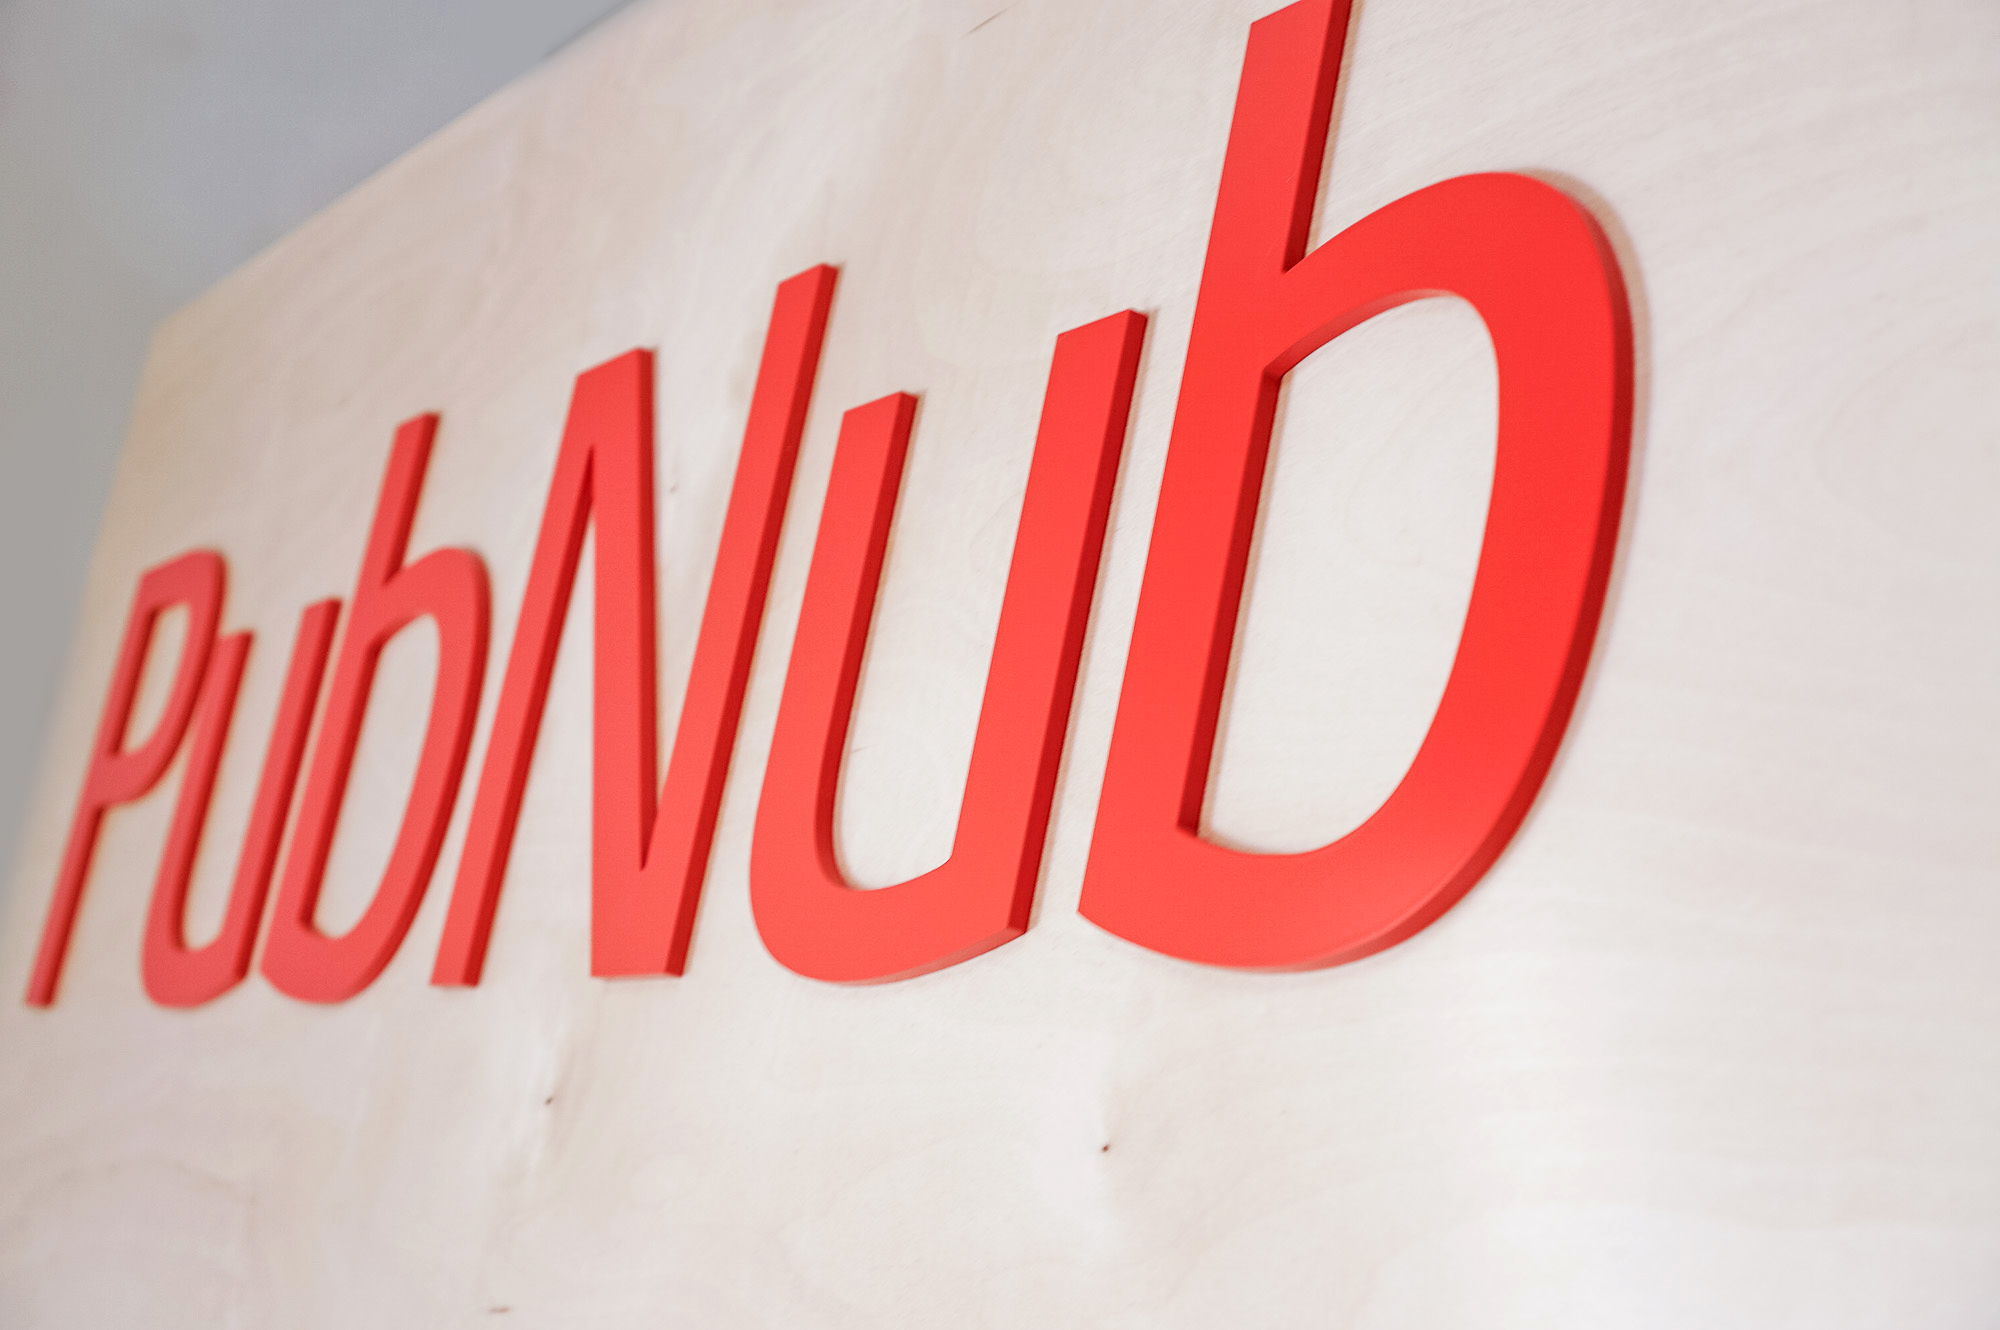 Light wood sign with red letters for PubNub, a global Data Stream Network and realtime infrastructure-as-a-service company based in San Francisco, California.